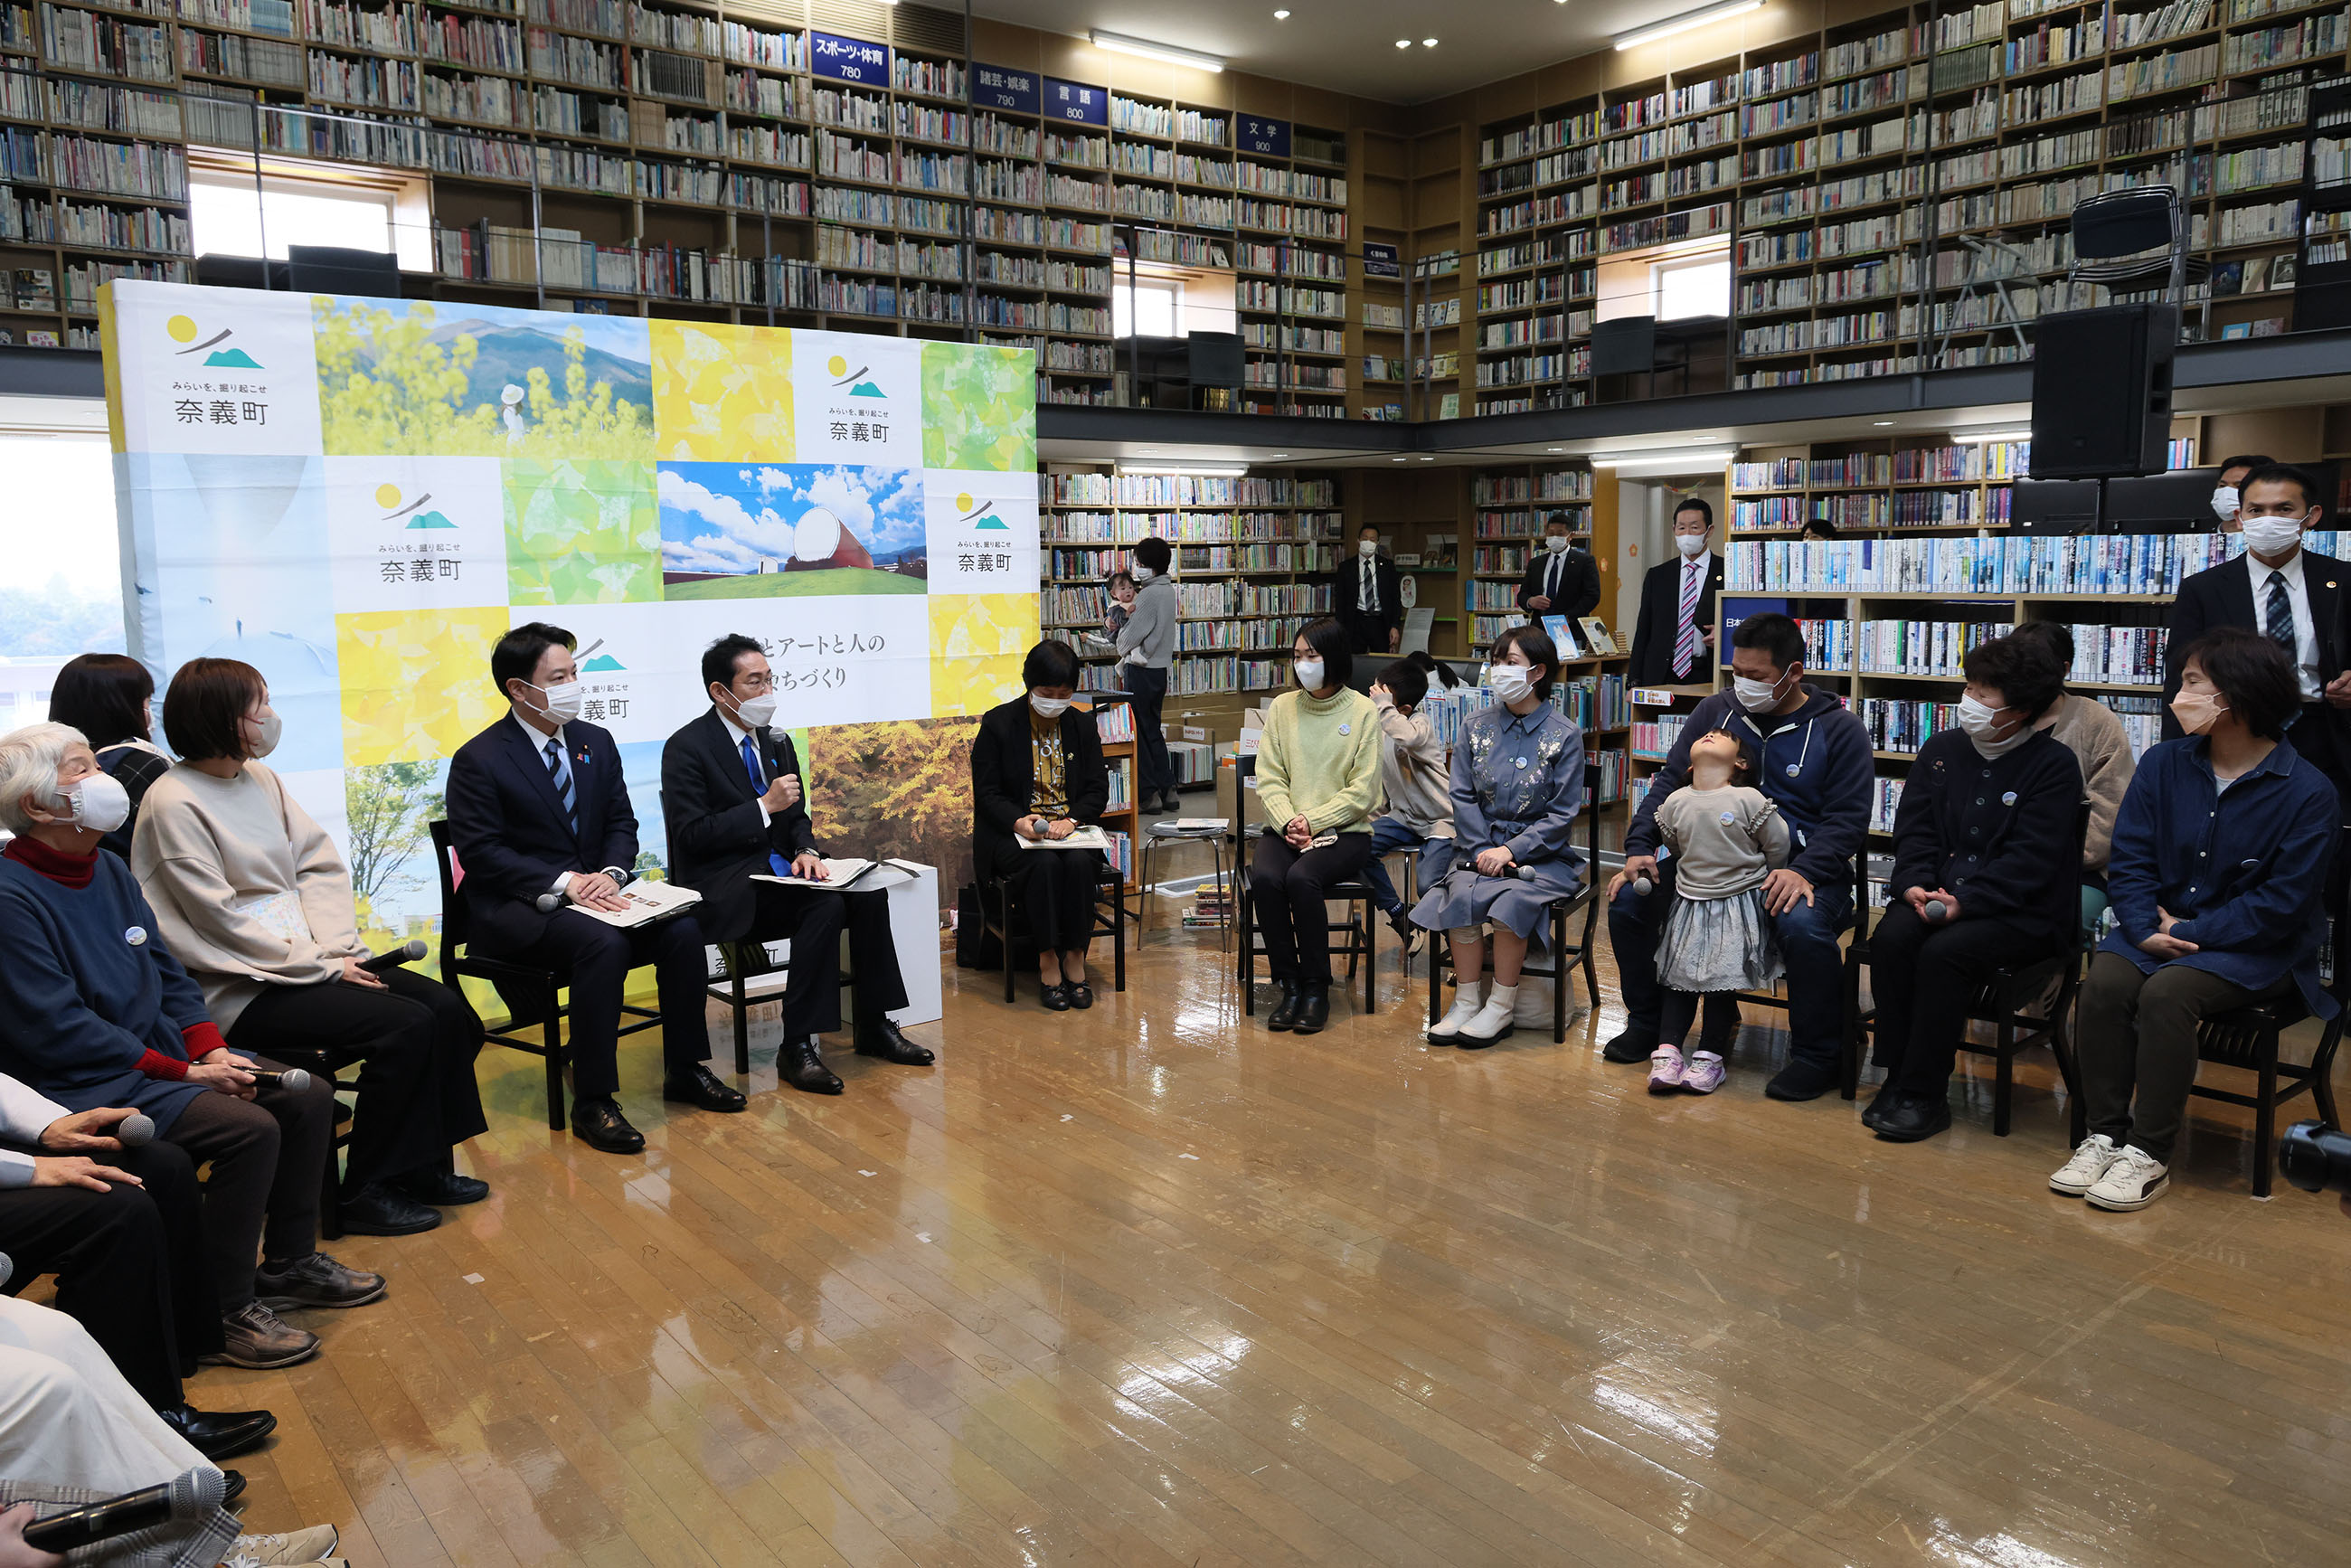 Prime Minster Kishida talking with participants in a public dialogue on policies related to children (3)